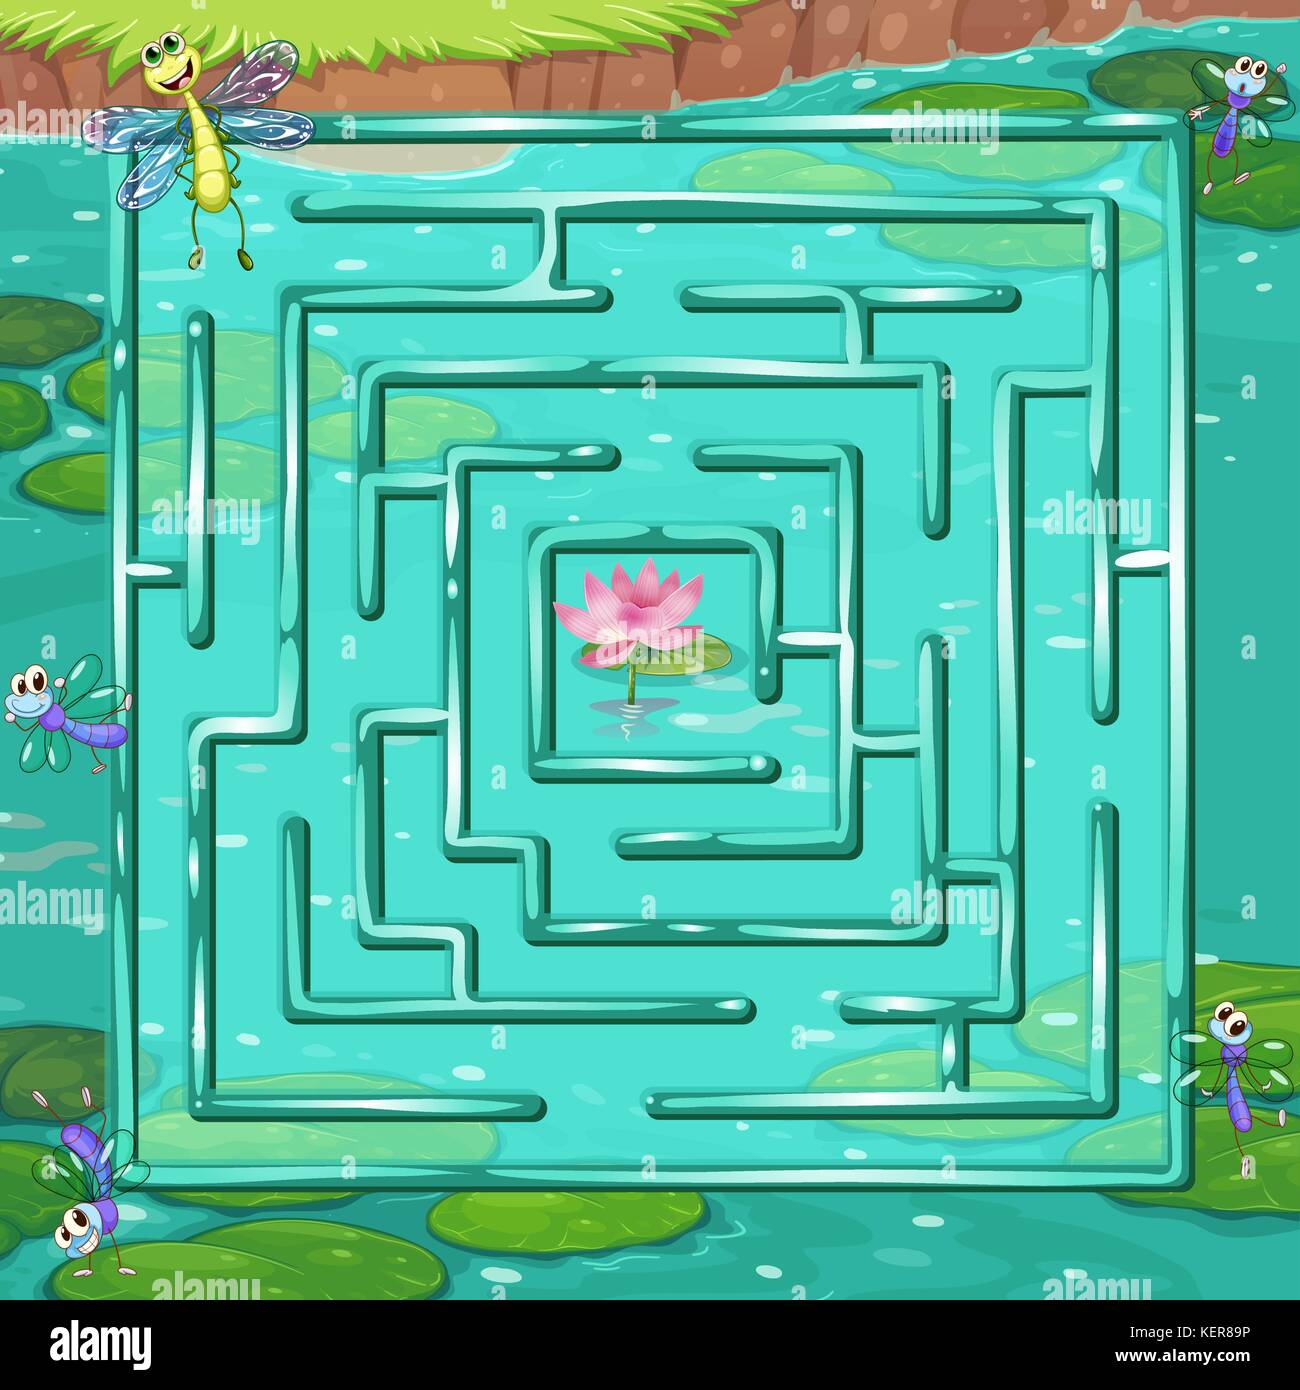 Illustration of a maze game with a pond background Stock Vector